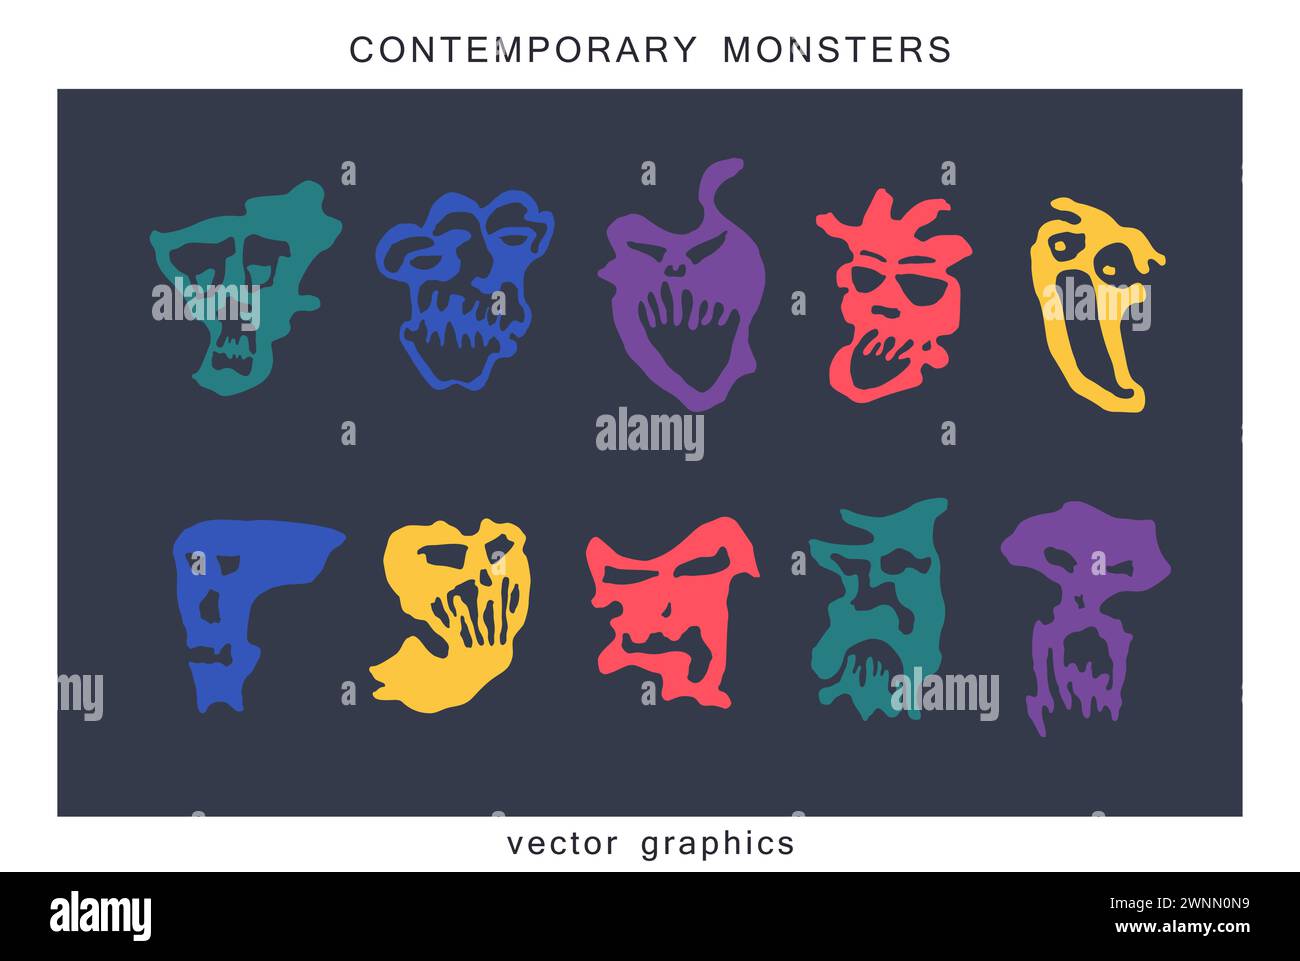 Fantastic surreal monsters set. Abstract contemporary minimalistic style. Ready design elements. Simple flat vector graphics Stock Vector